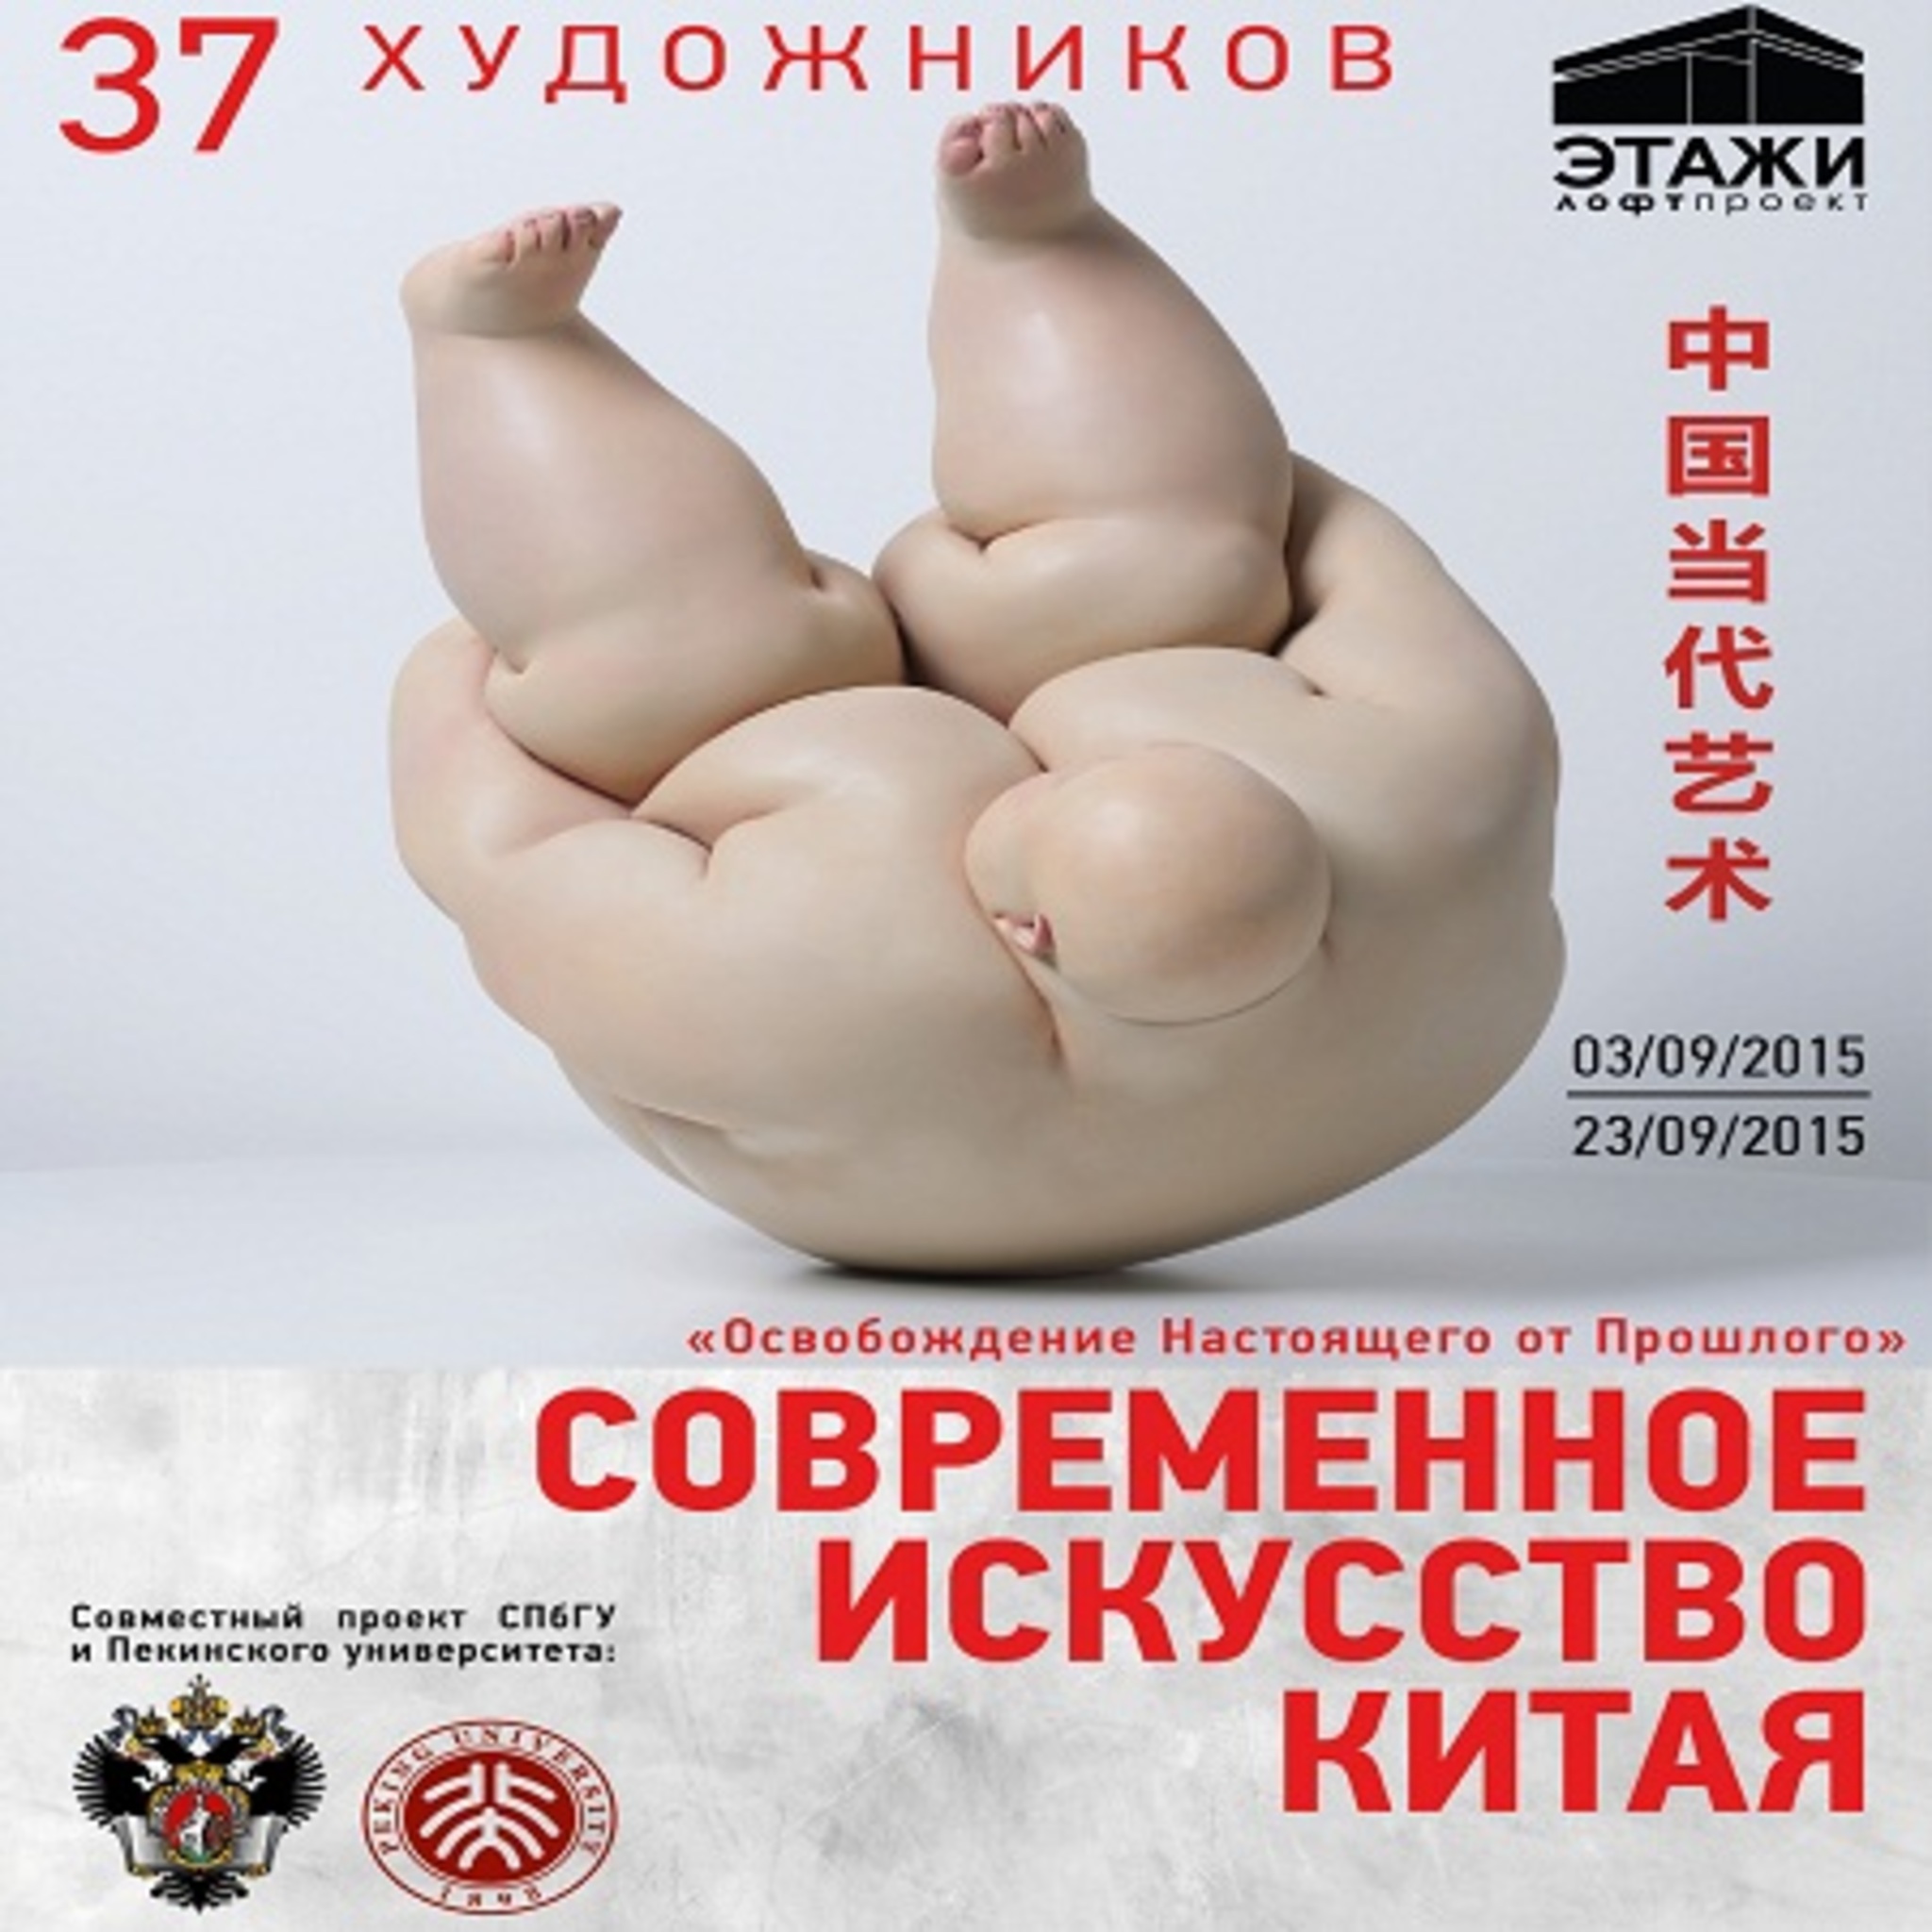 The exhibition Contemporary art in China. Exemption Present from the Past